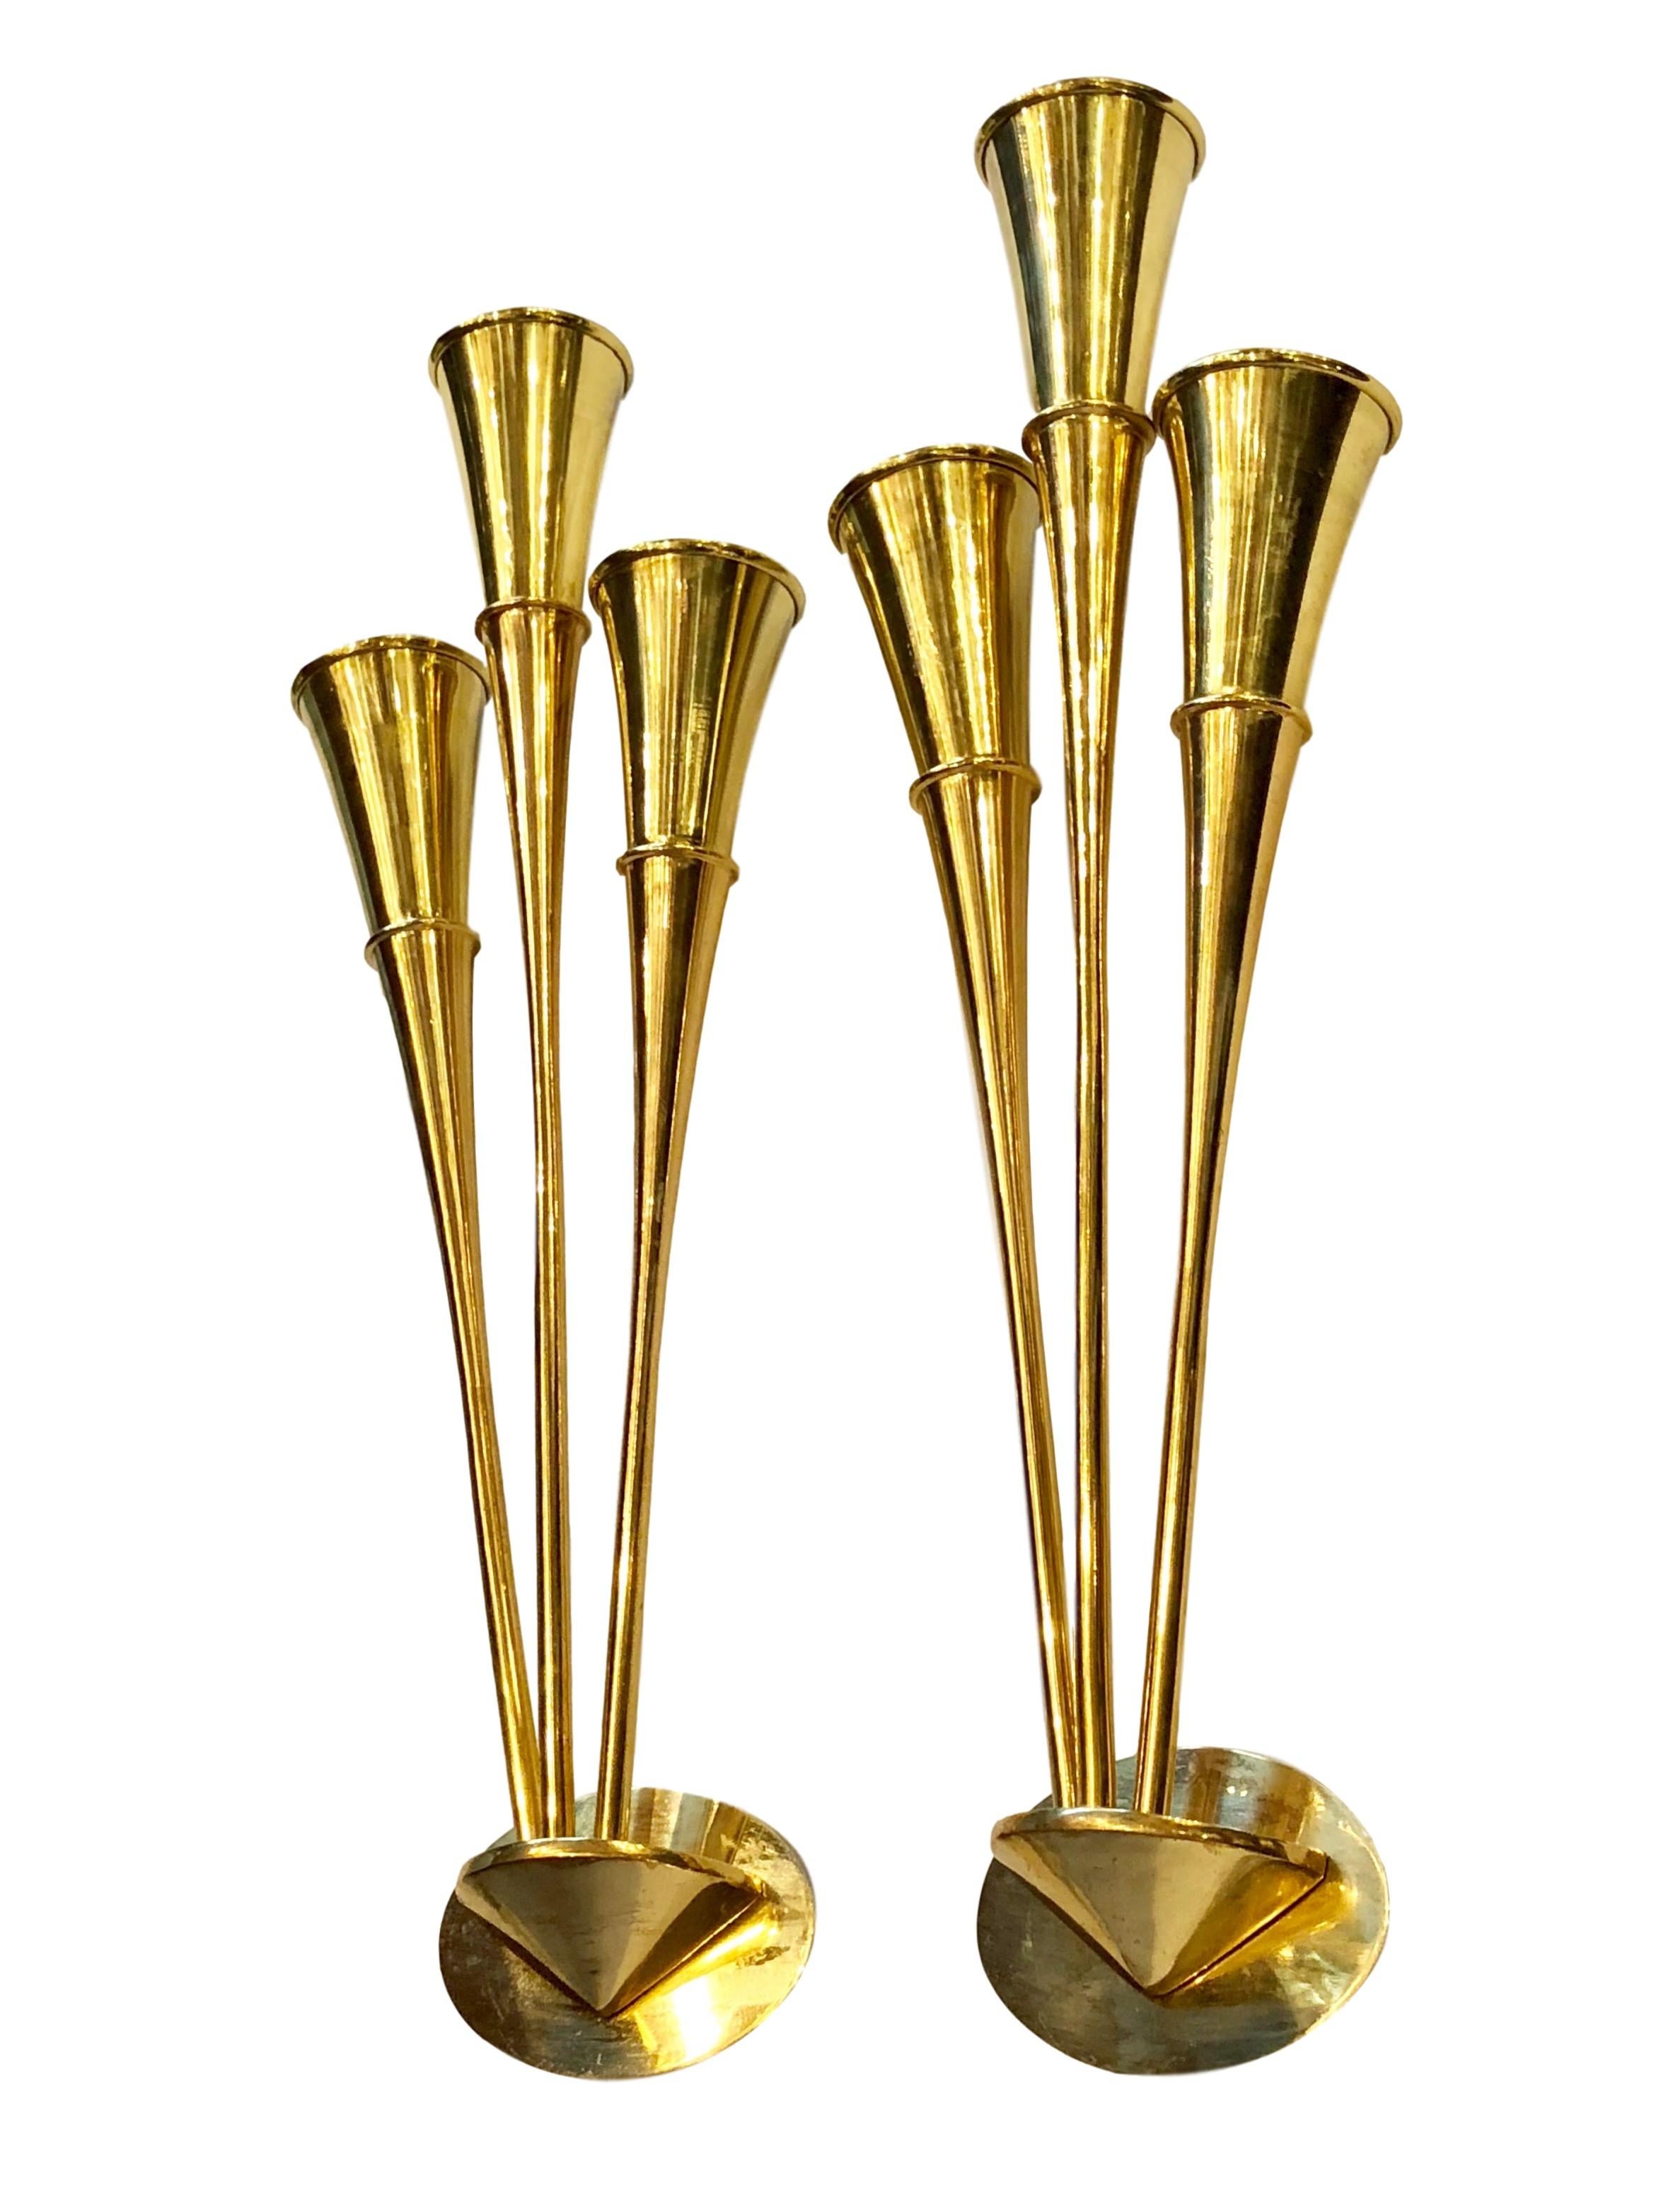 Mid-20th Century Pair of Moderne Sconces For Sale